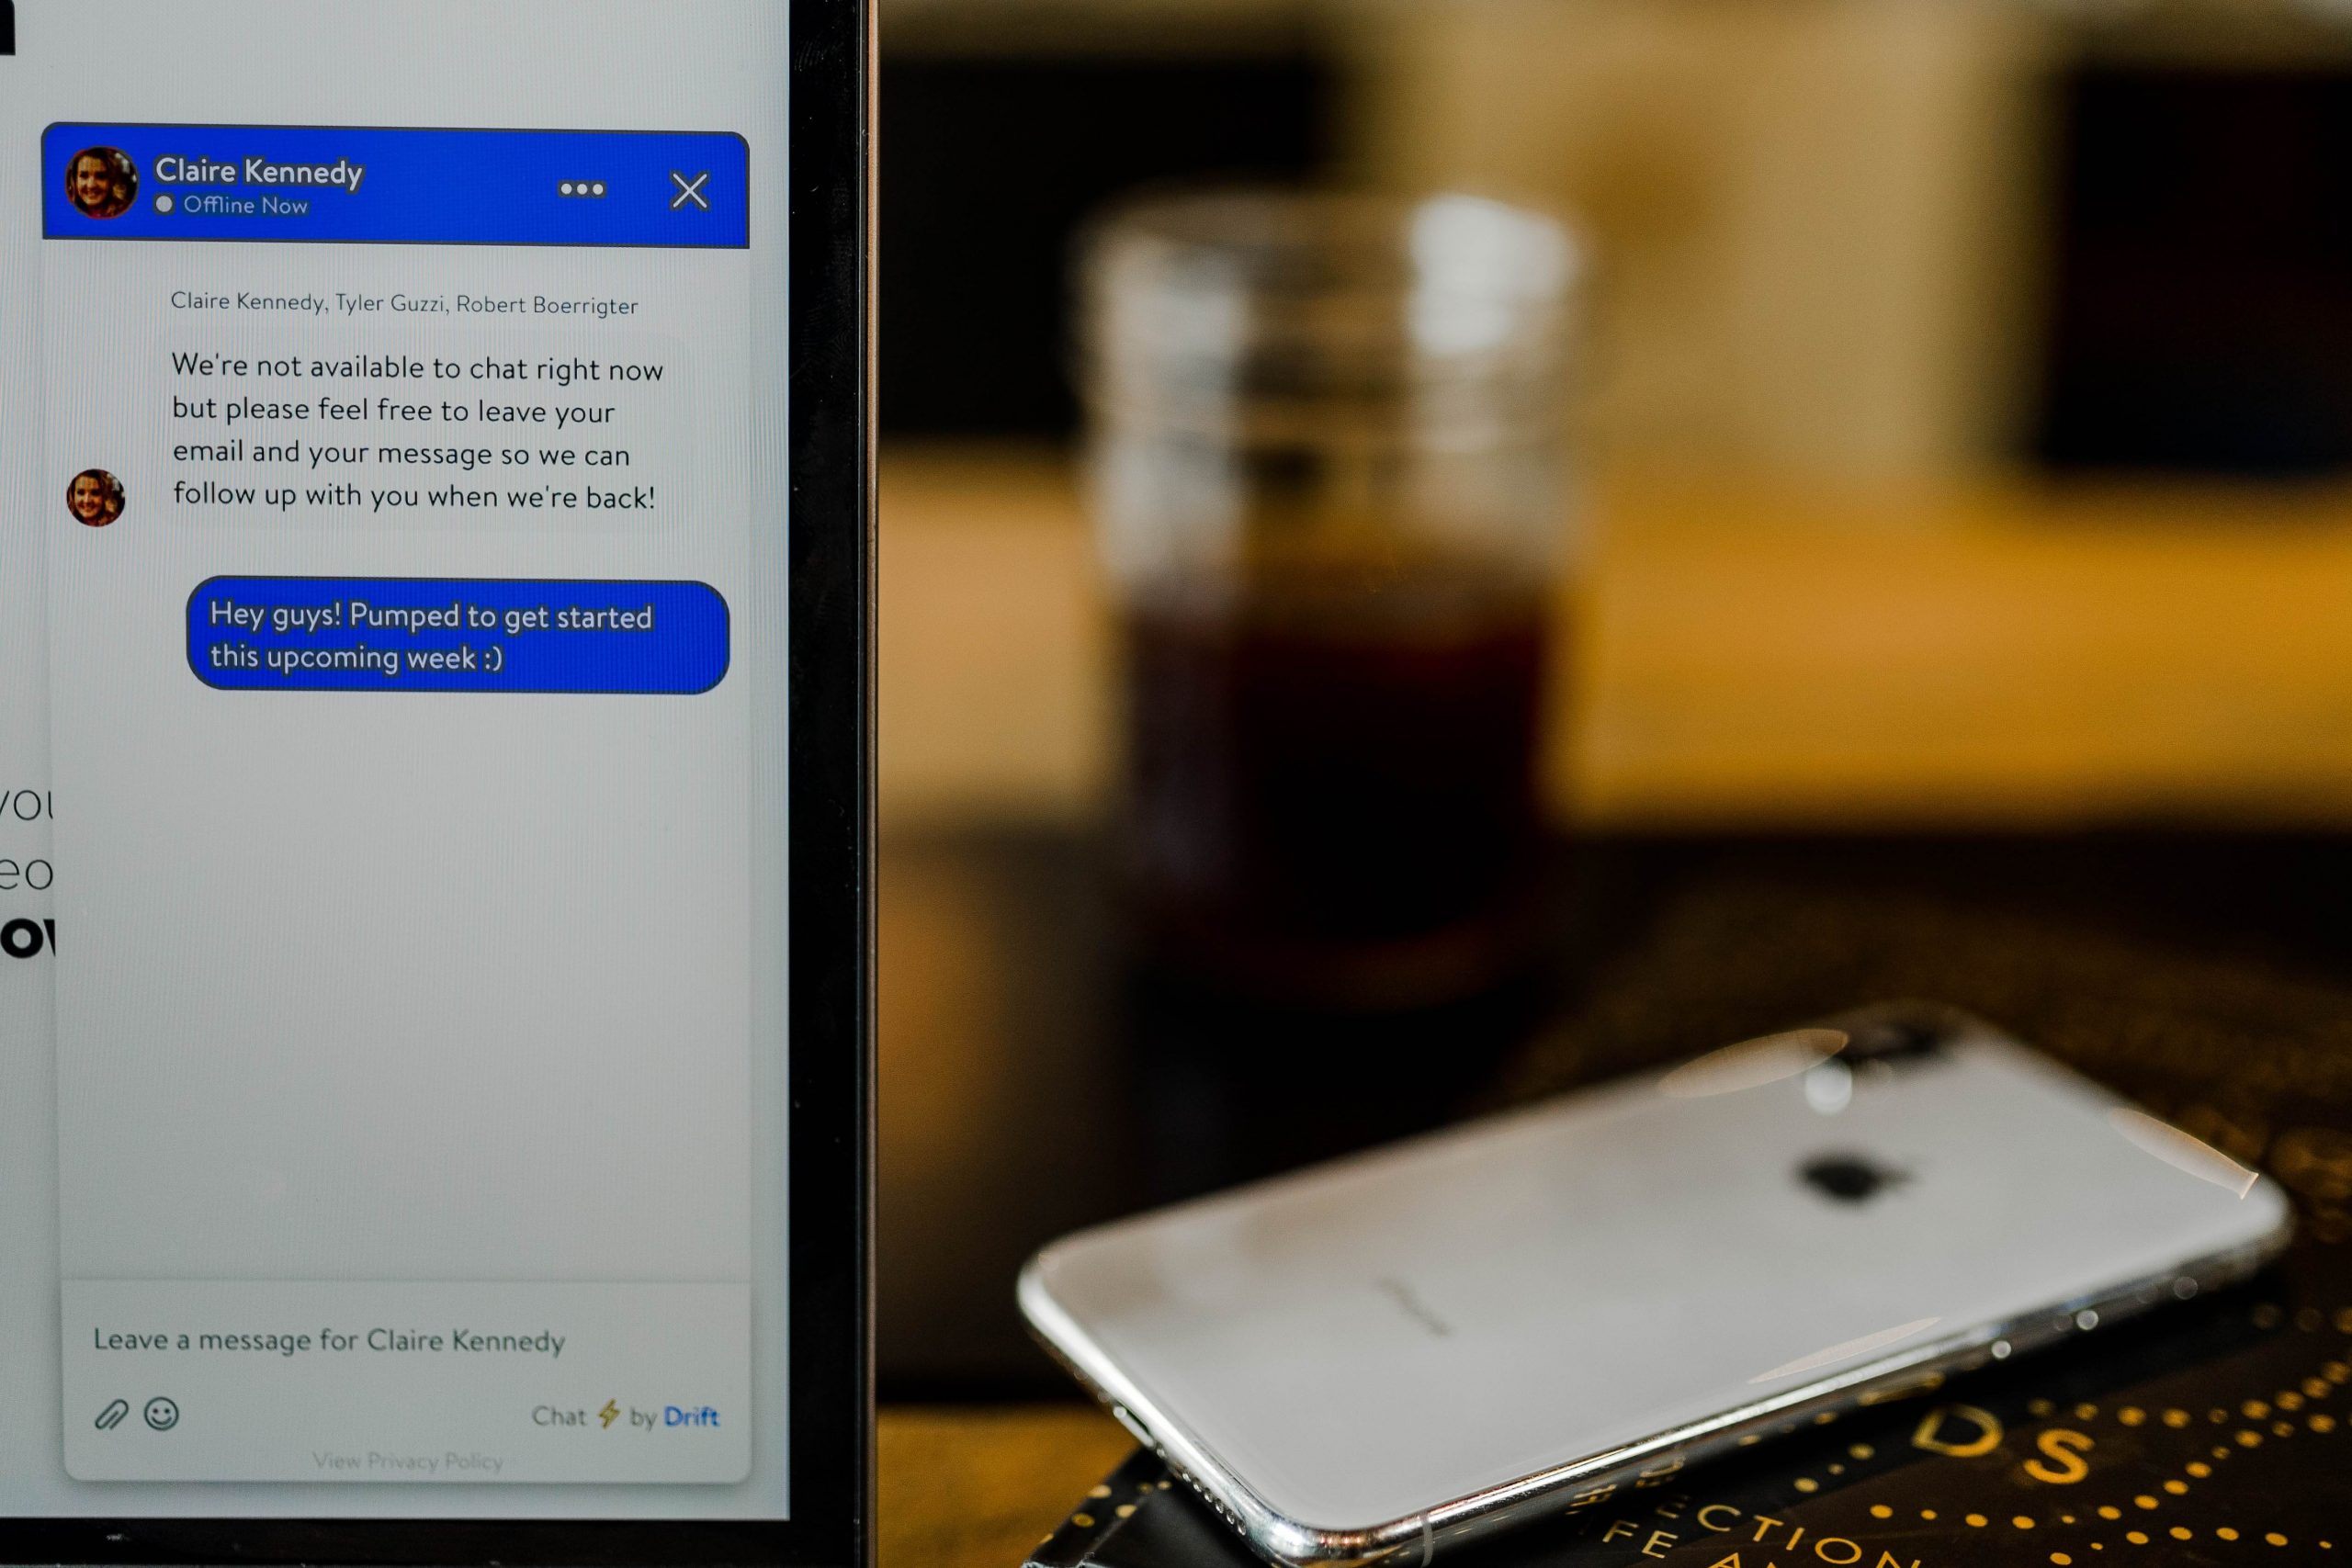 What Are Chatbots and Why Are They Talking to Me?